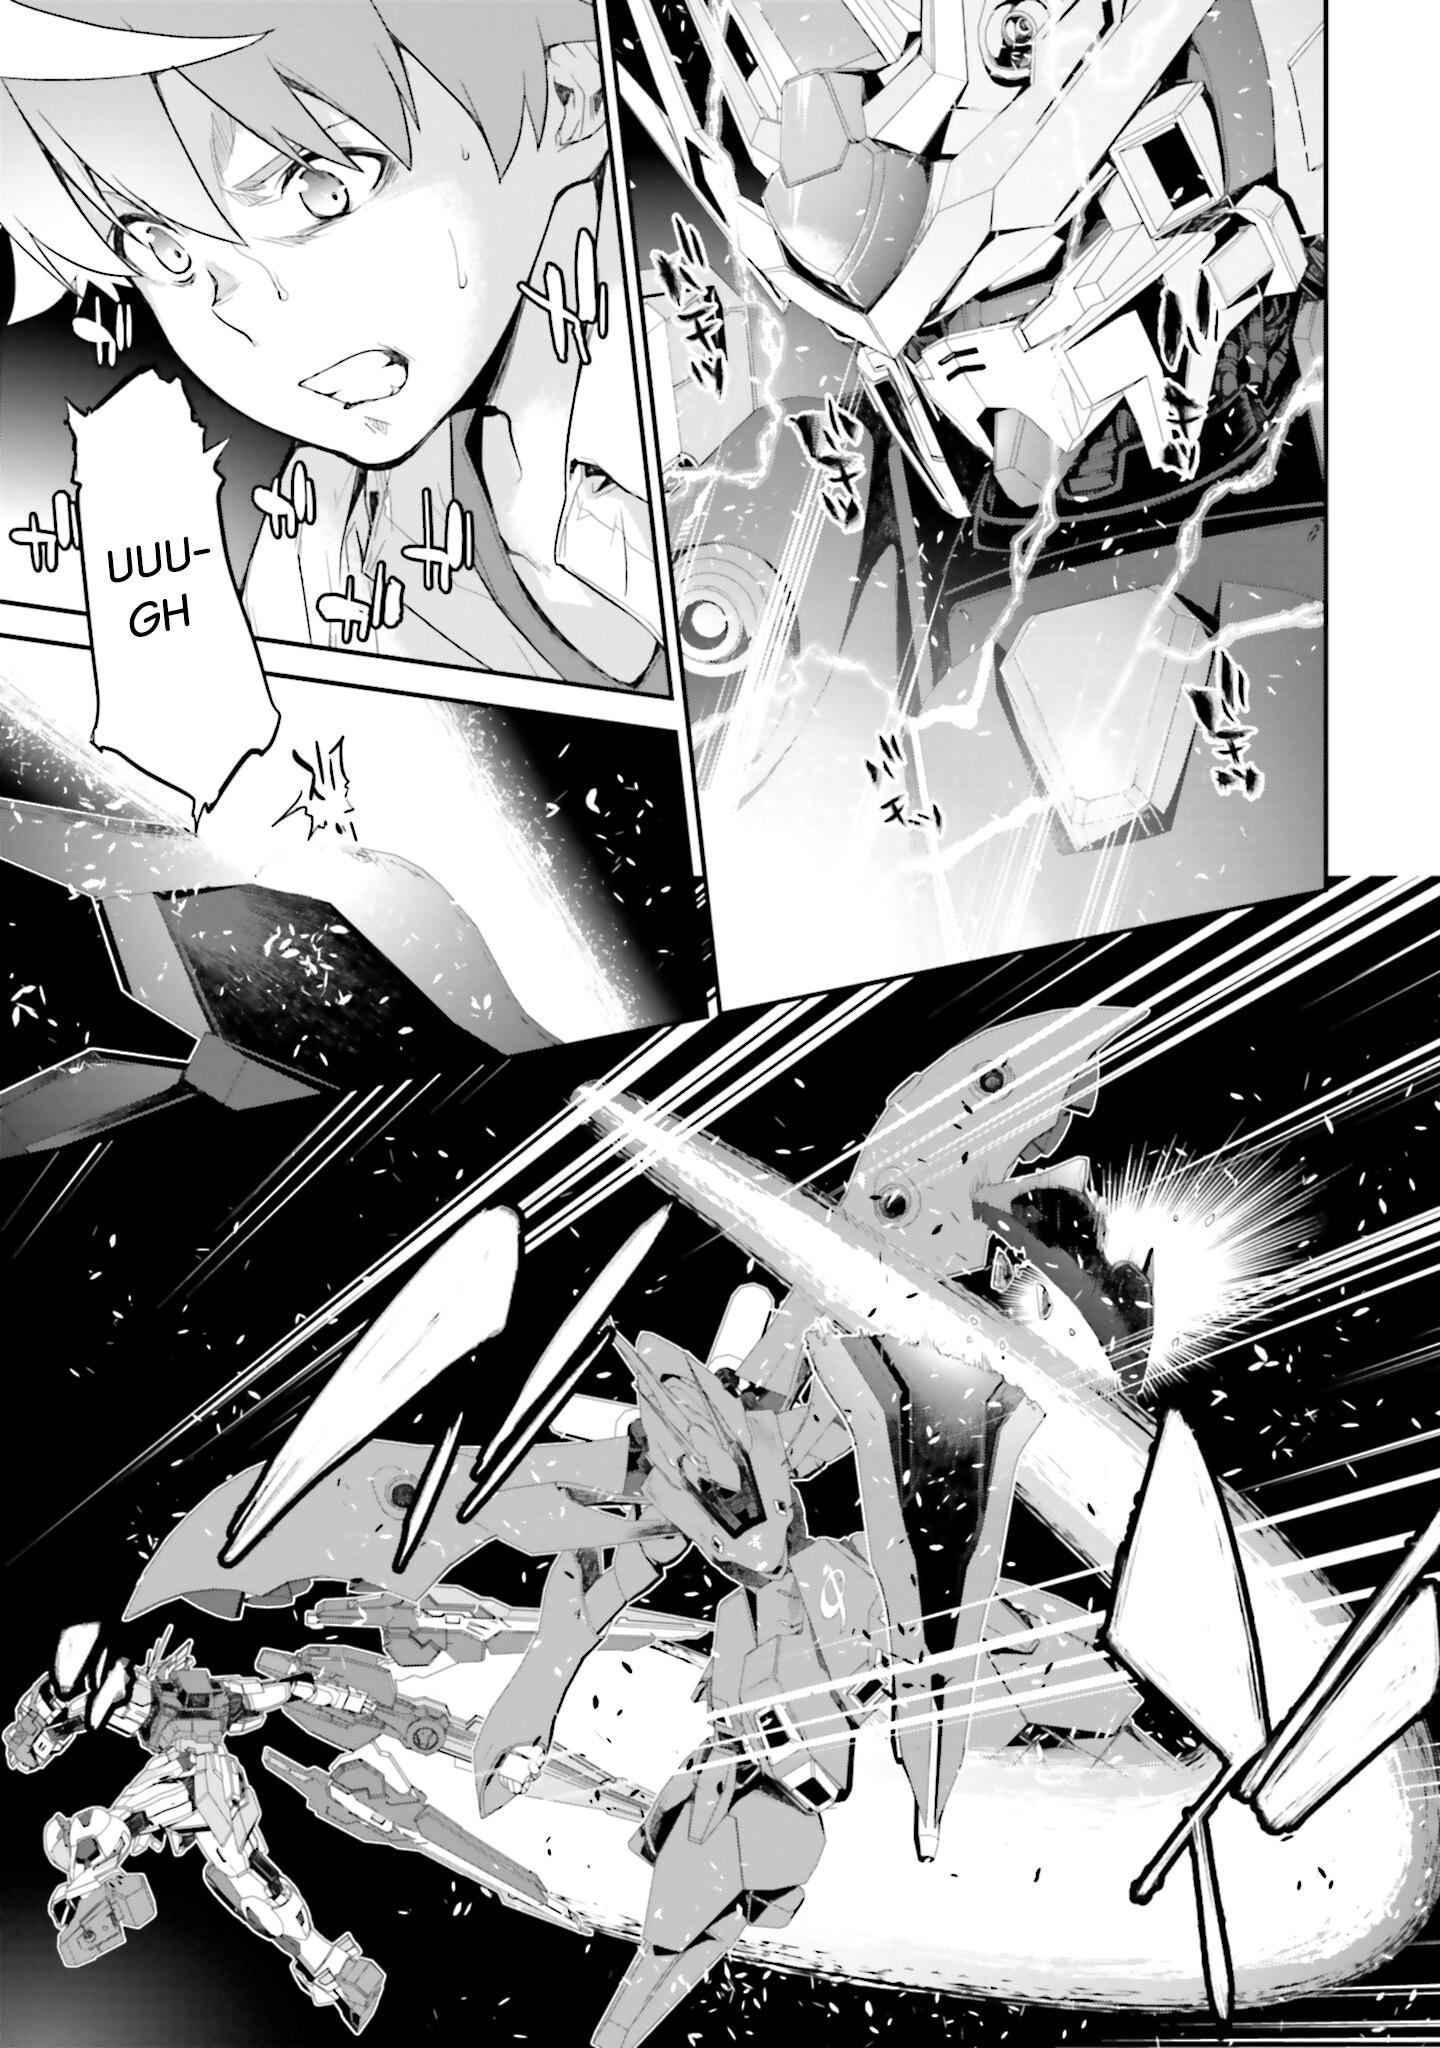 Mobile Suit Gundam N-Extreme Vol.1 Chapter 6: Mission 6 [Beyond The Axis] -Part 3- - Picture 3